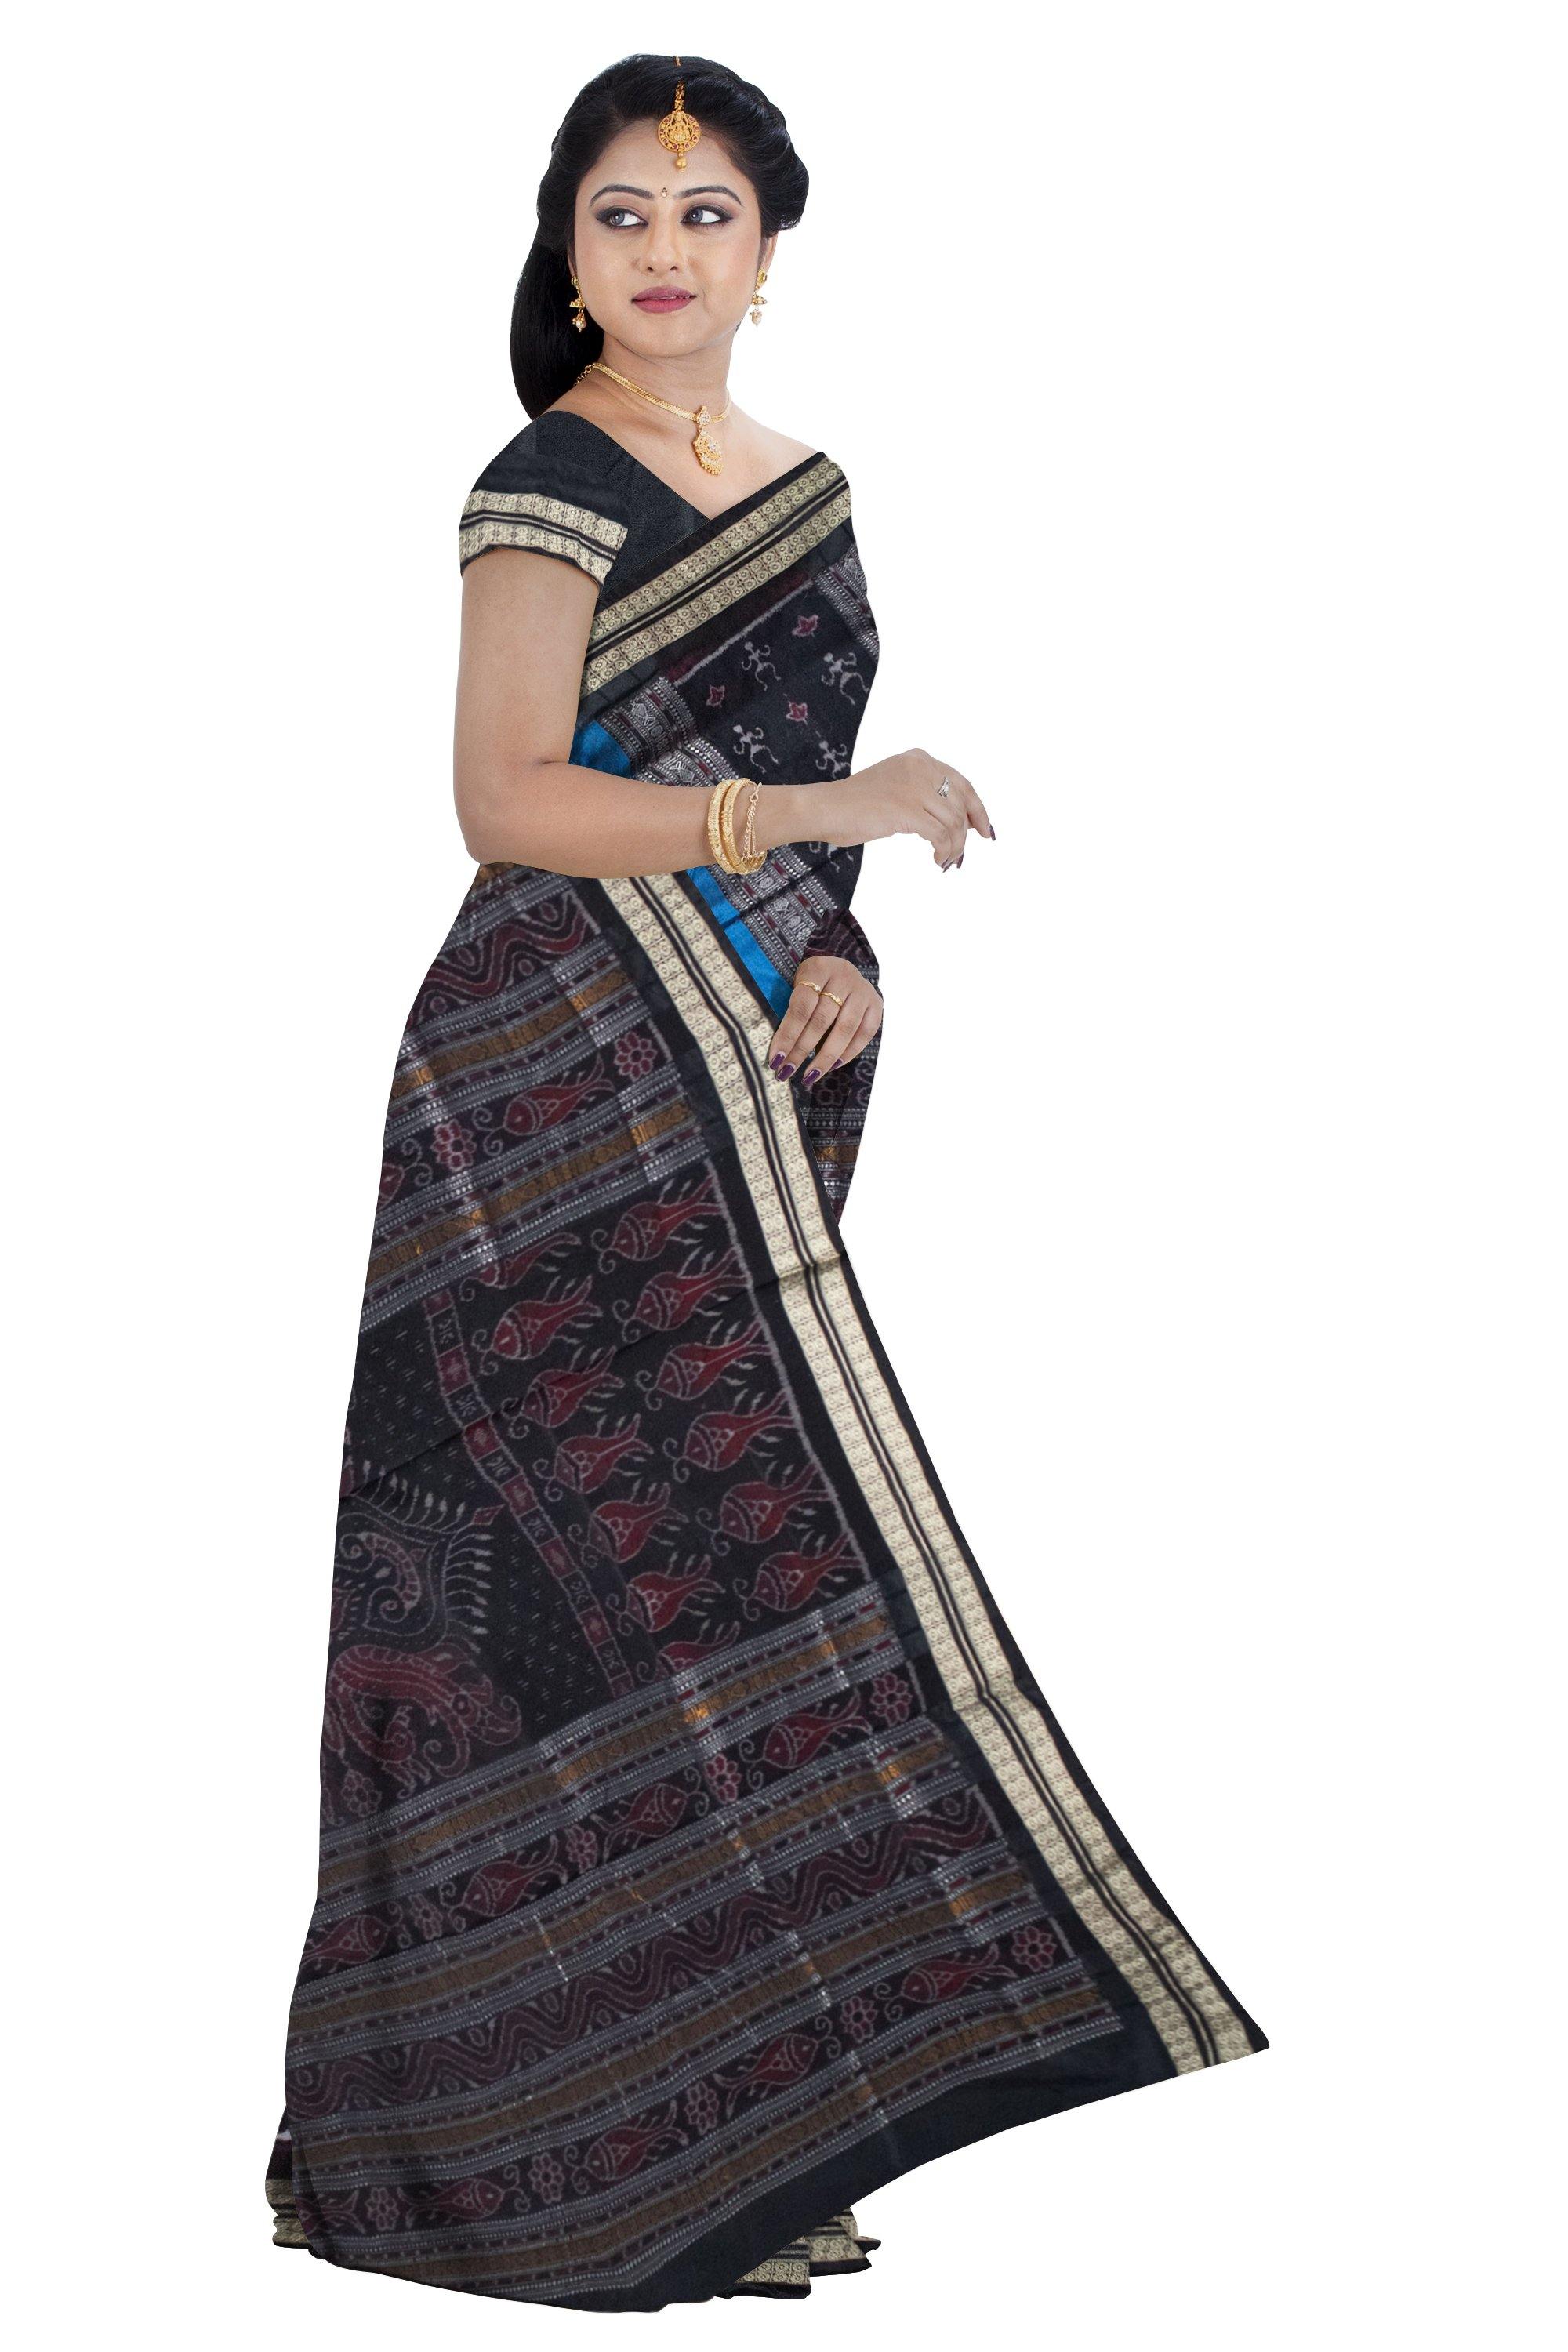 Latest design Pata saree in blue and black and flora print with blouse Piece - Koshali Arts & Crafts Enterprise